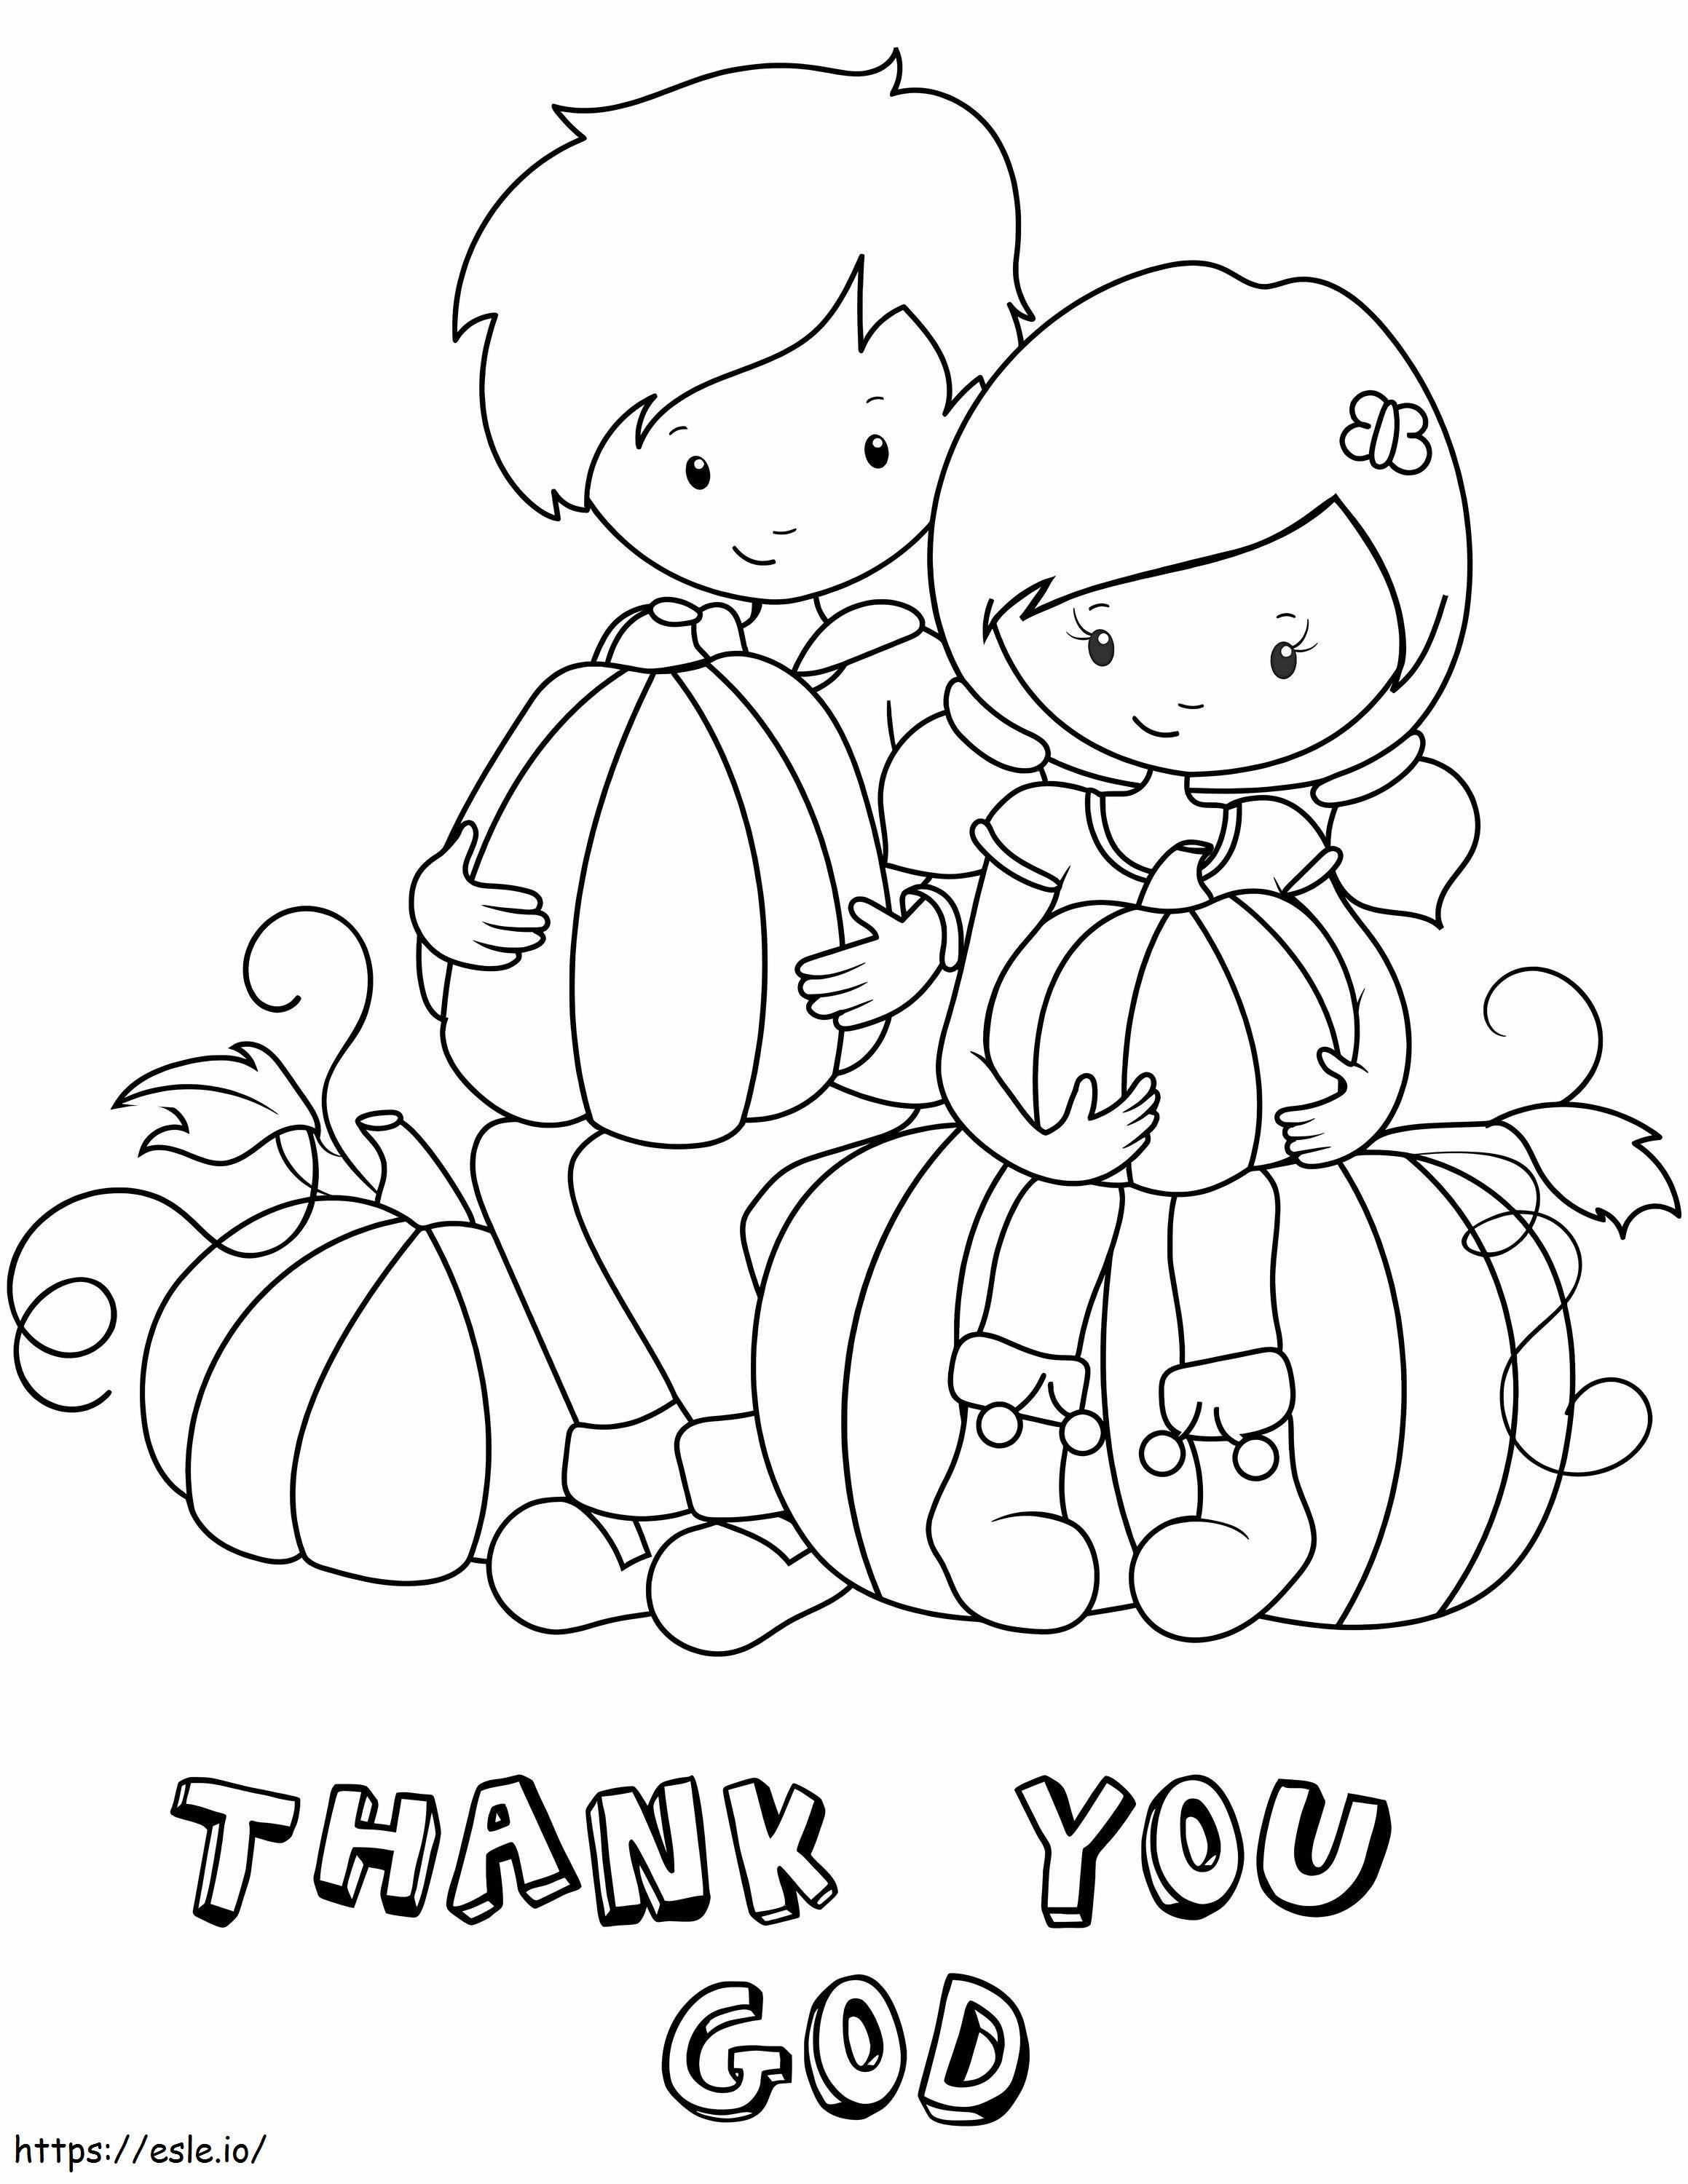 Thank You God 1 coloring page